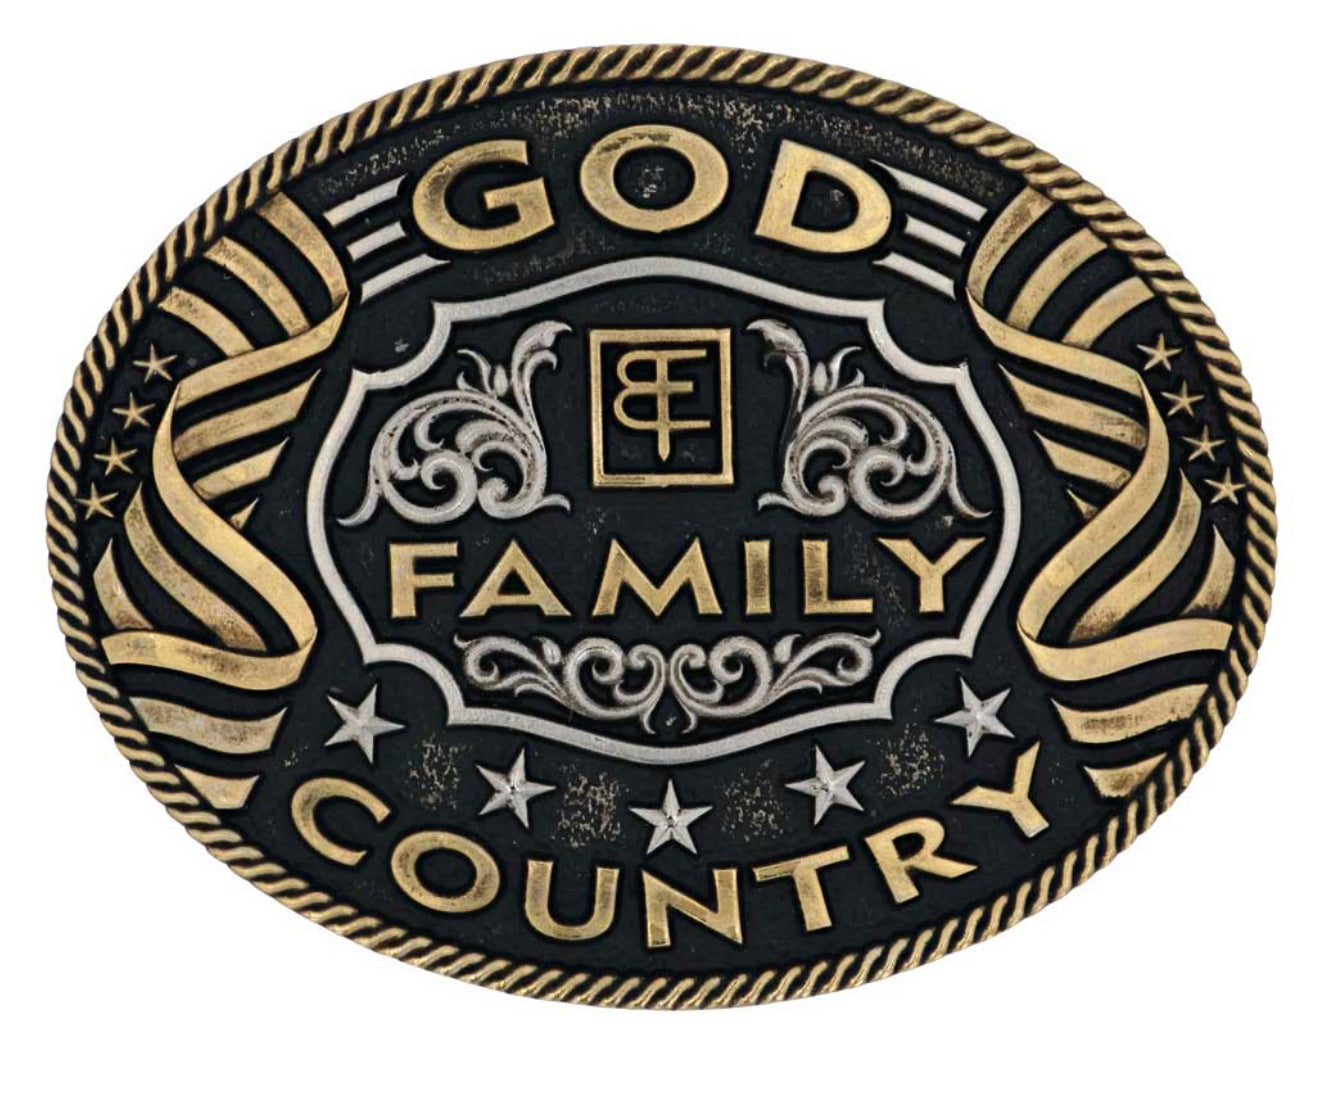 God, Family, Country, Belt Buckle